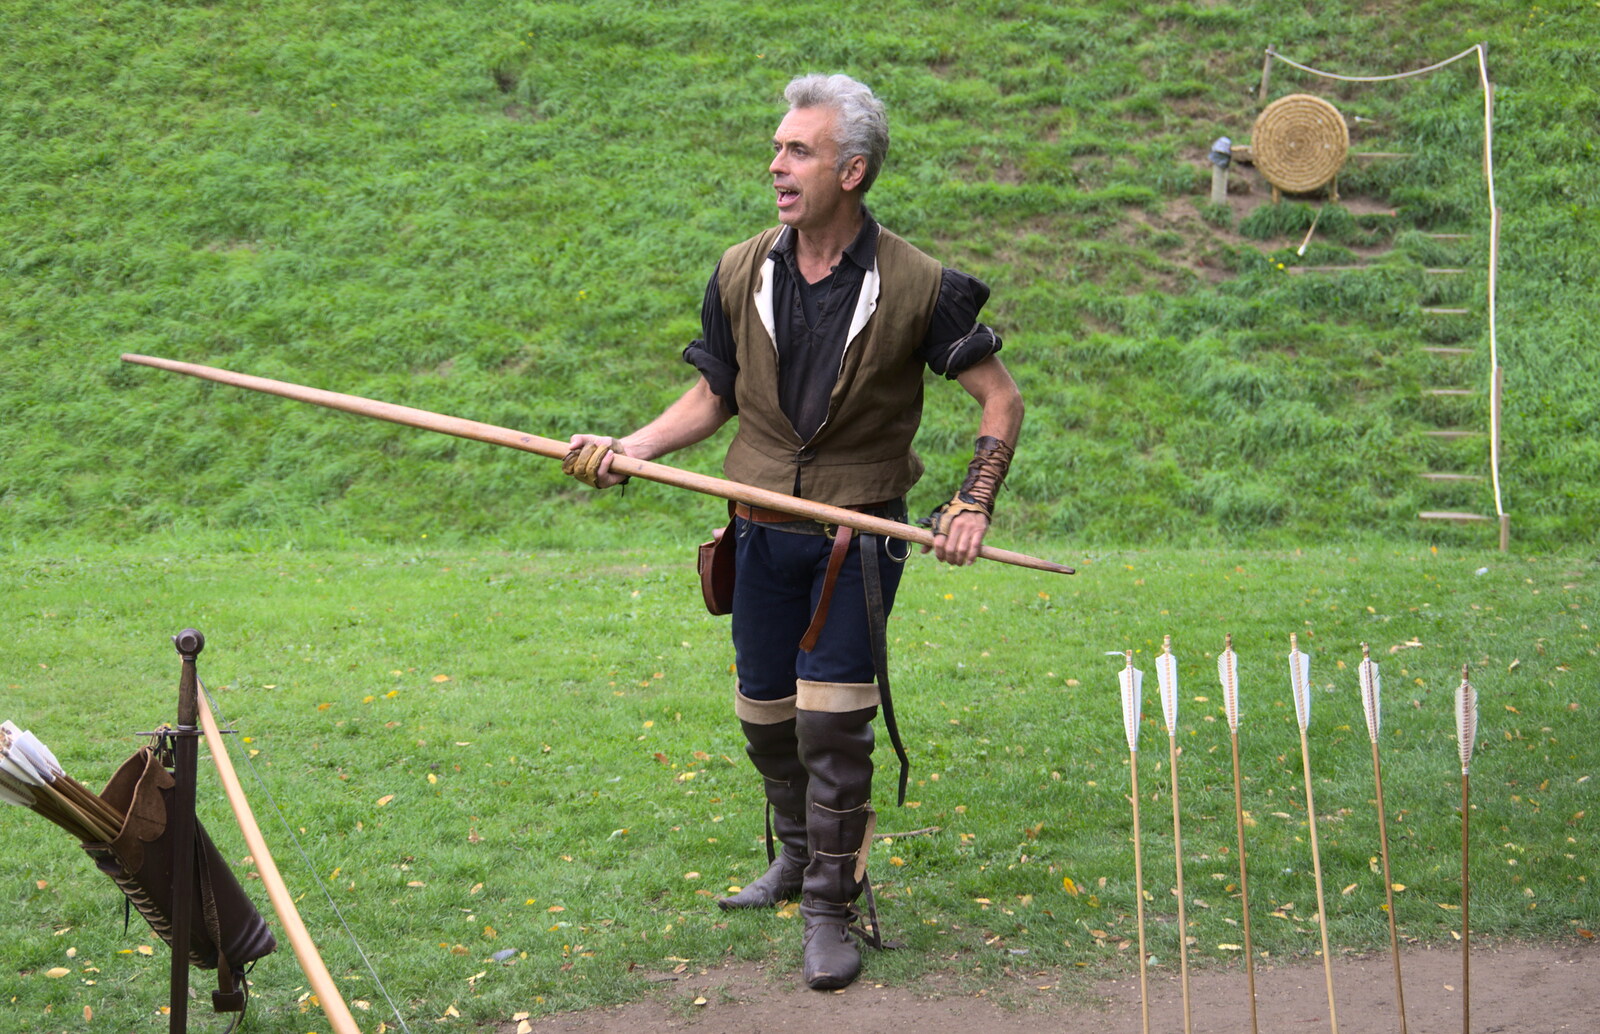 The trebuchet dude is now doing longbows  from A Day at Warwick Castle, Warwickshire - 8th September 2018